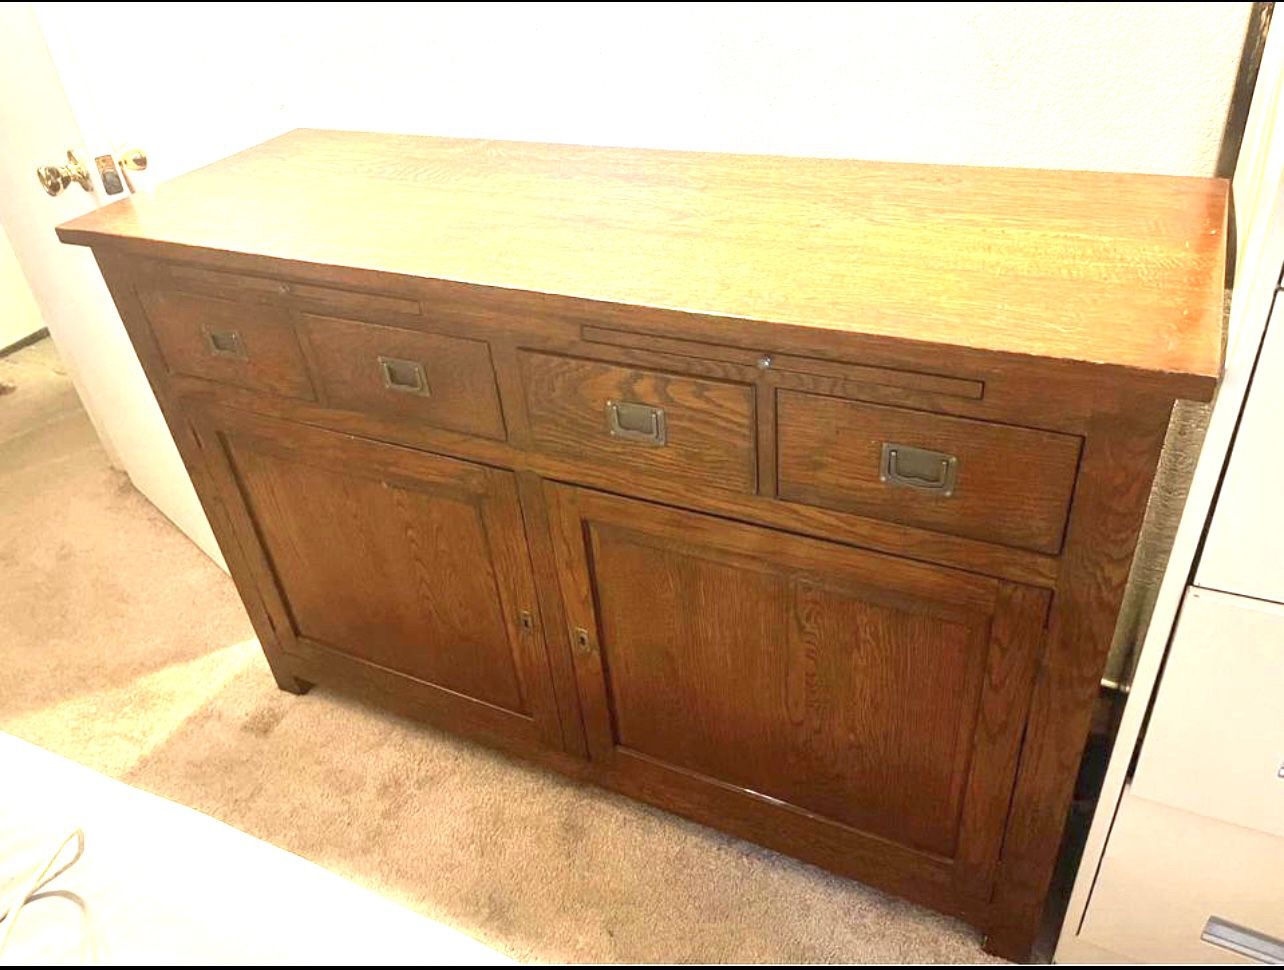 Mid Century Dark Brown Wood Cabinet Buffet Sideboard Locking Drawers and Sliding Trays Very Rare! Comes with a set of keys In wonderful condition! 68”